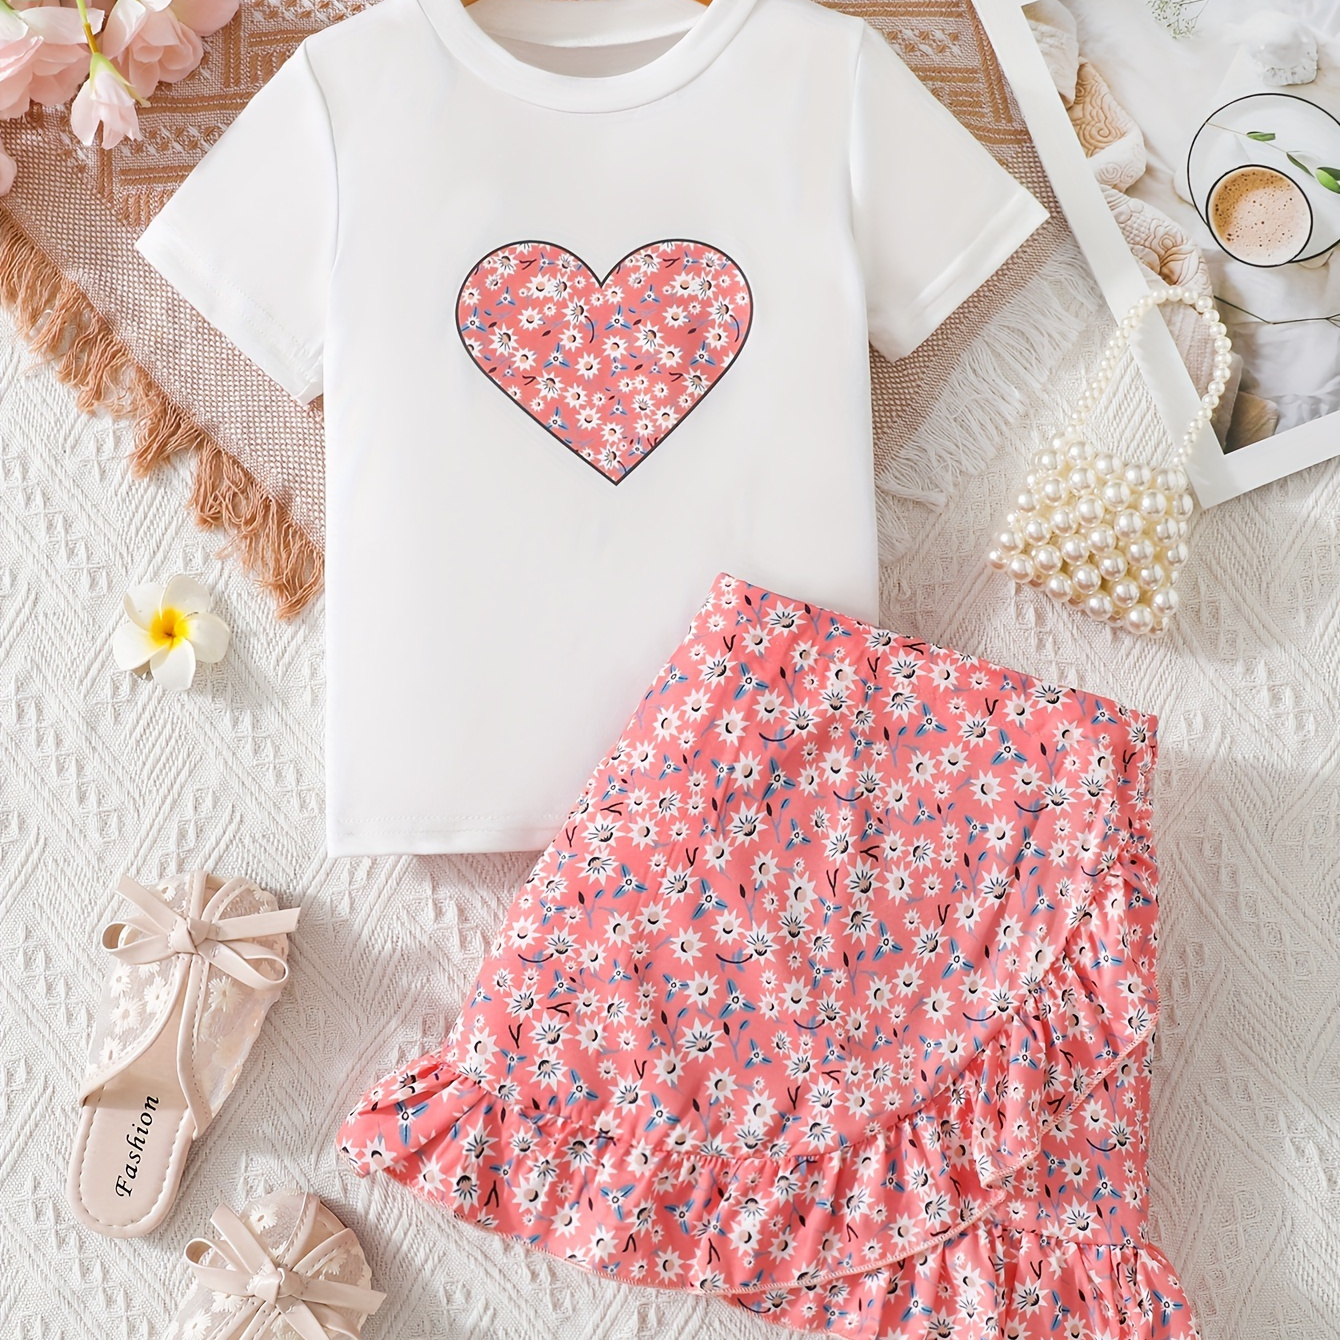 

Floral Print Girl's 2pcs, Short Sleeve T-shirt Top + Ruffle Floral Skirt Set For Vacation Party Daily Outfit, Summer Clothes